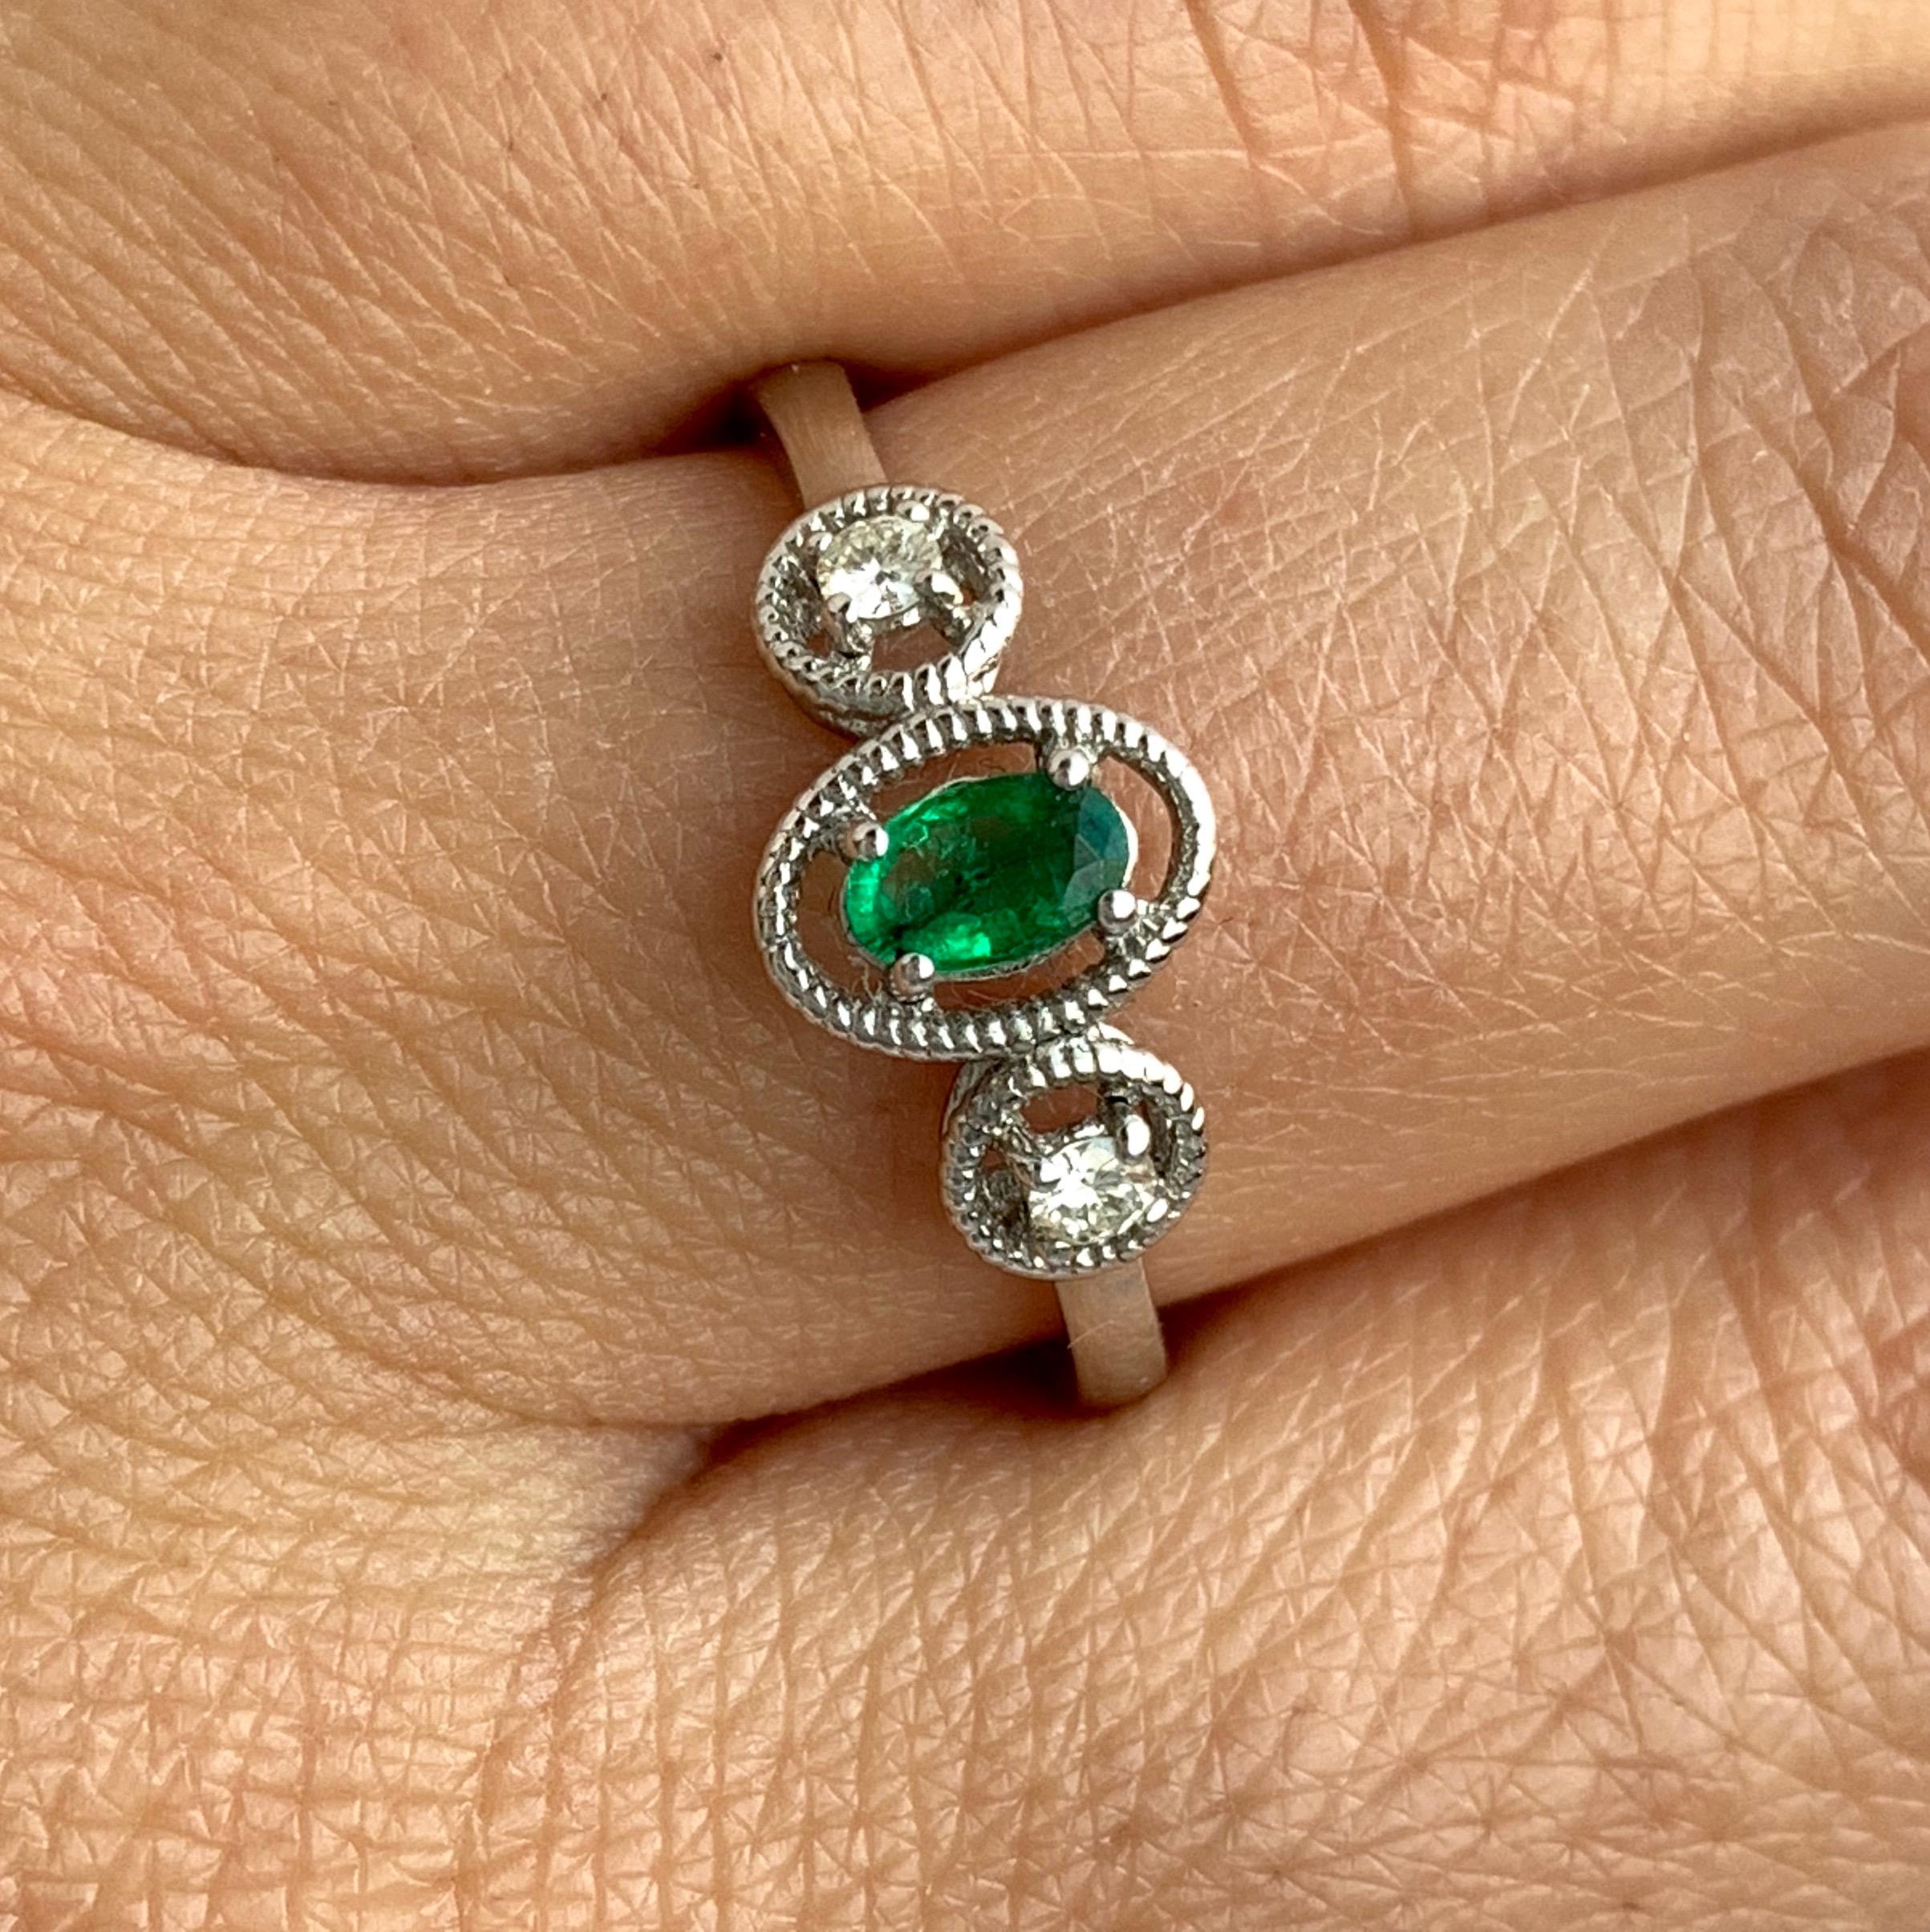 Material: 14k White Gold 
Center Stone Details: 0.21 Carat Oval Emerald measuring 5x 3.3 mm
Mounting Diamond Details: 2 Brilliant Round White Diamonds at 0.07 Carats - Clarity: SI / Color: H-I
Ring Size: Size 6.25 (can be sized)

Fine one-of-a-kind